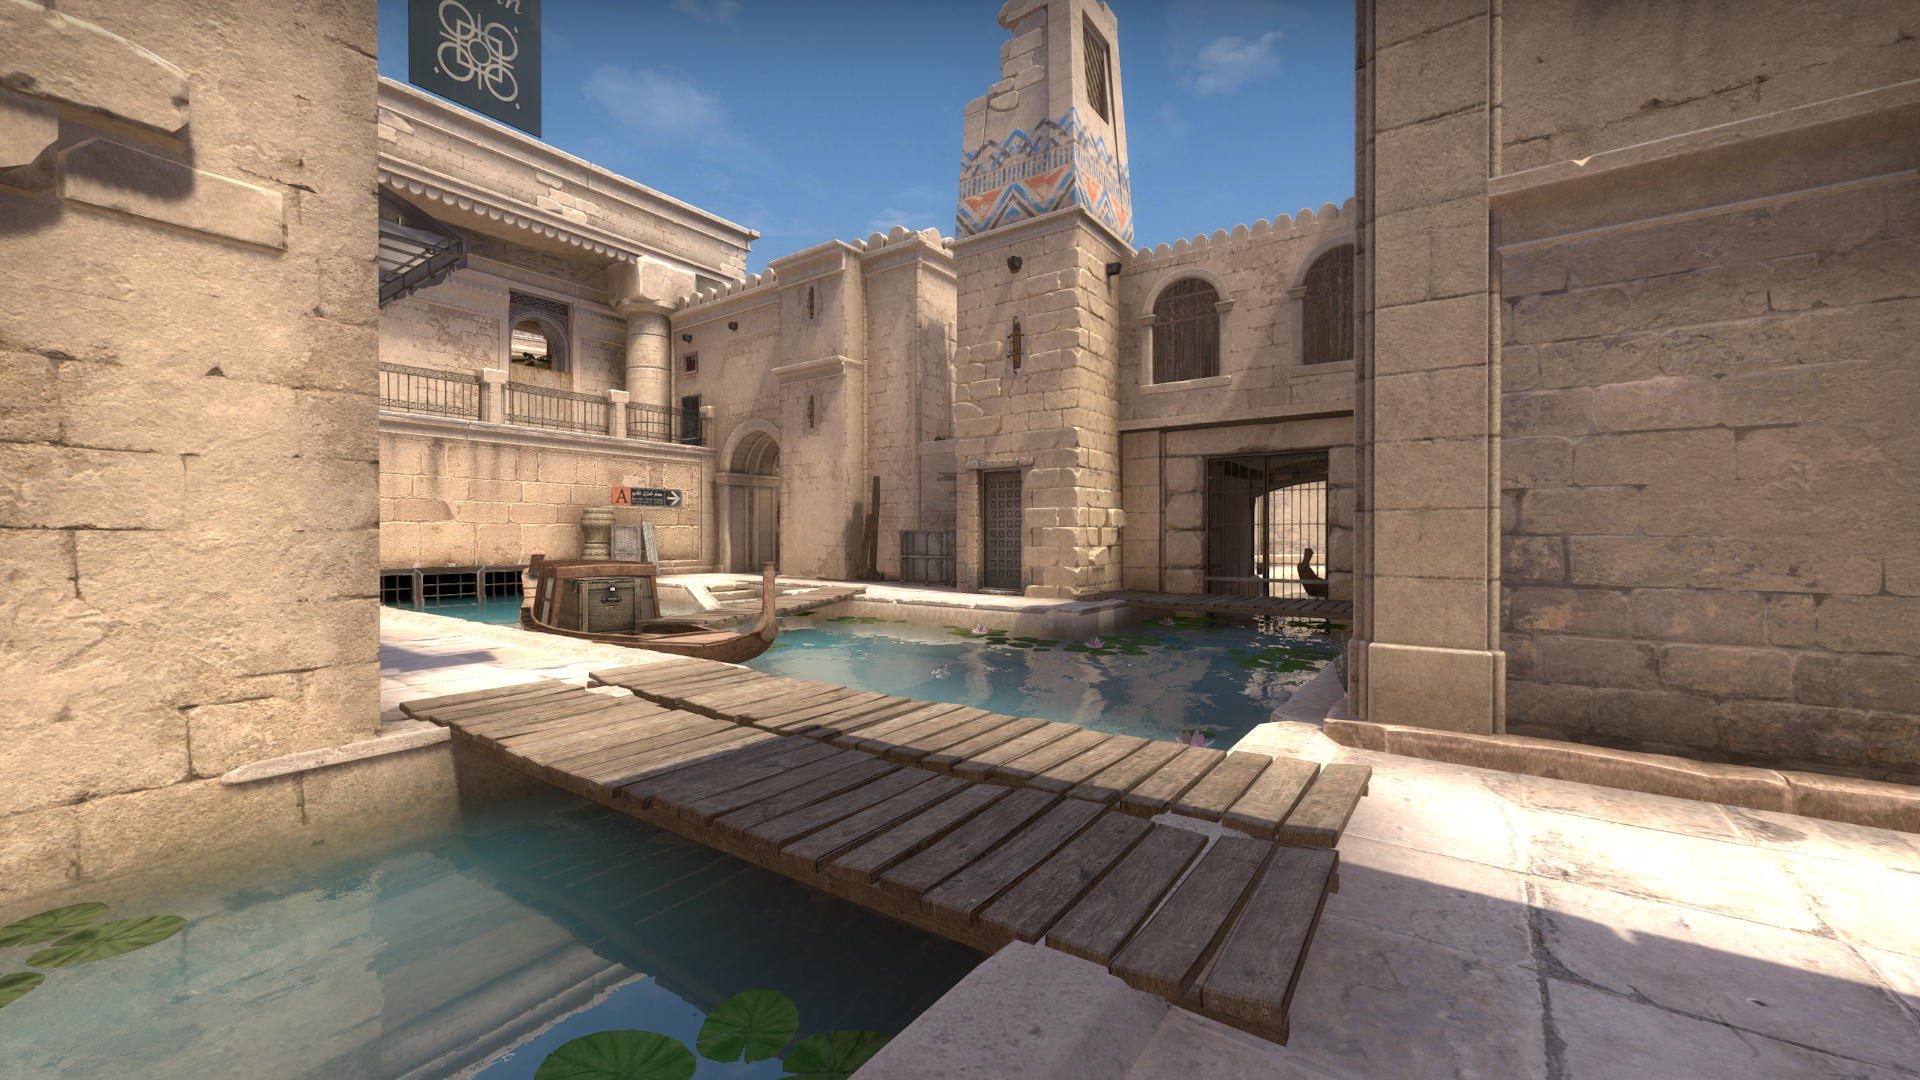 Anubis and Chlorine added in latest CS:GO update | The Loadout